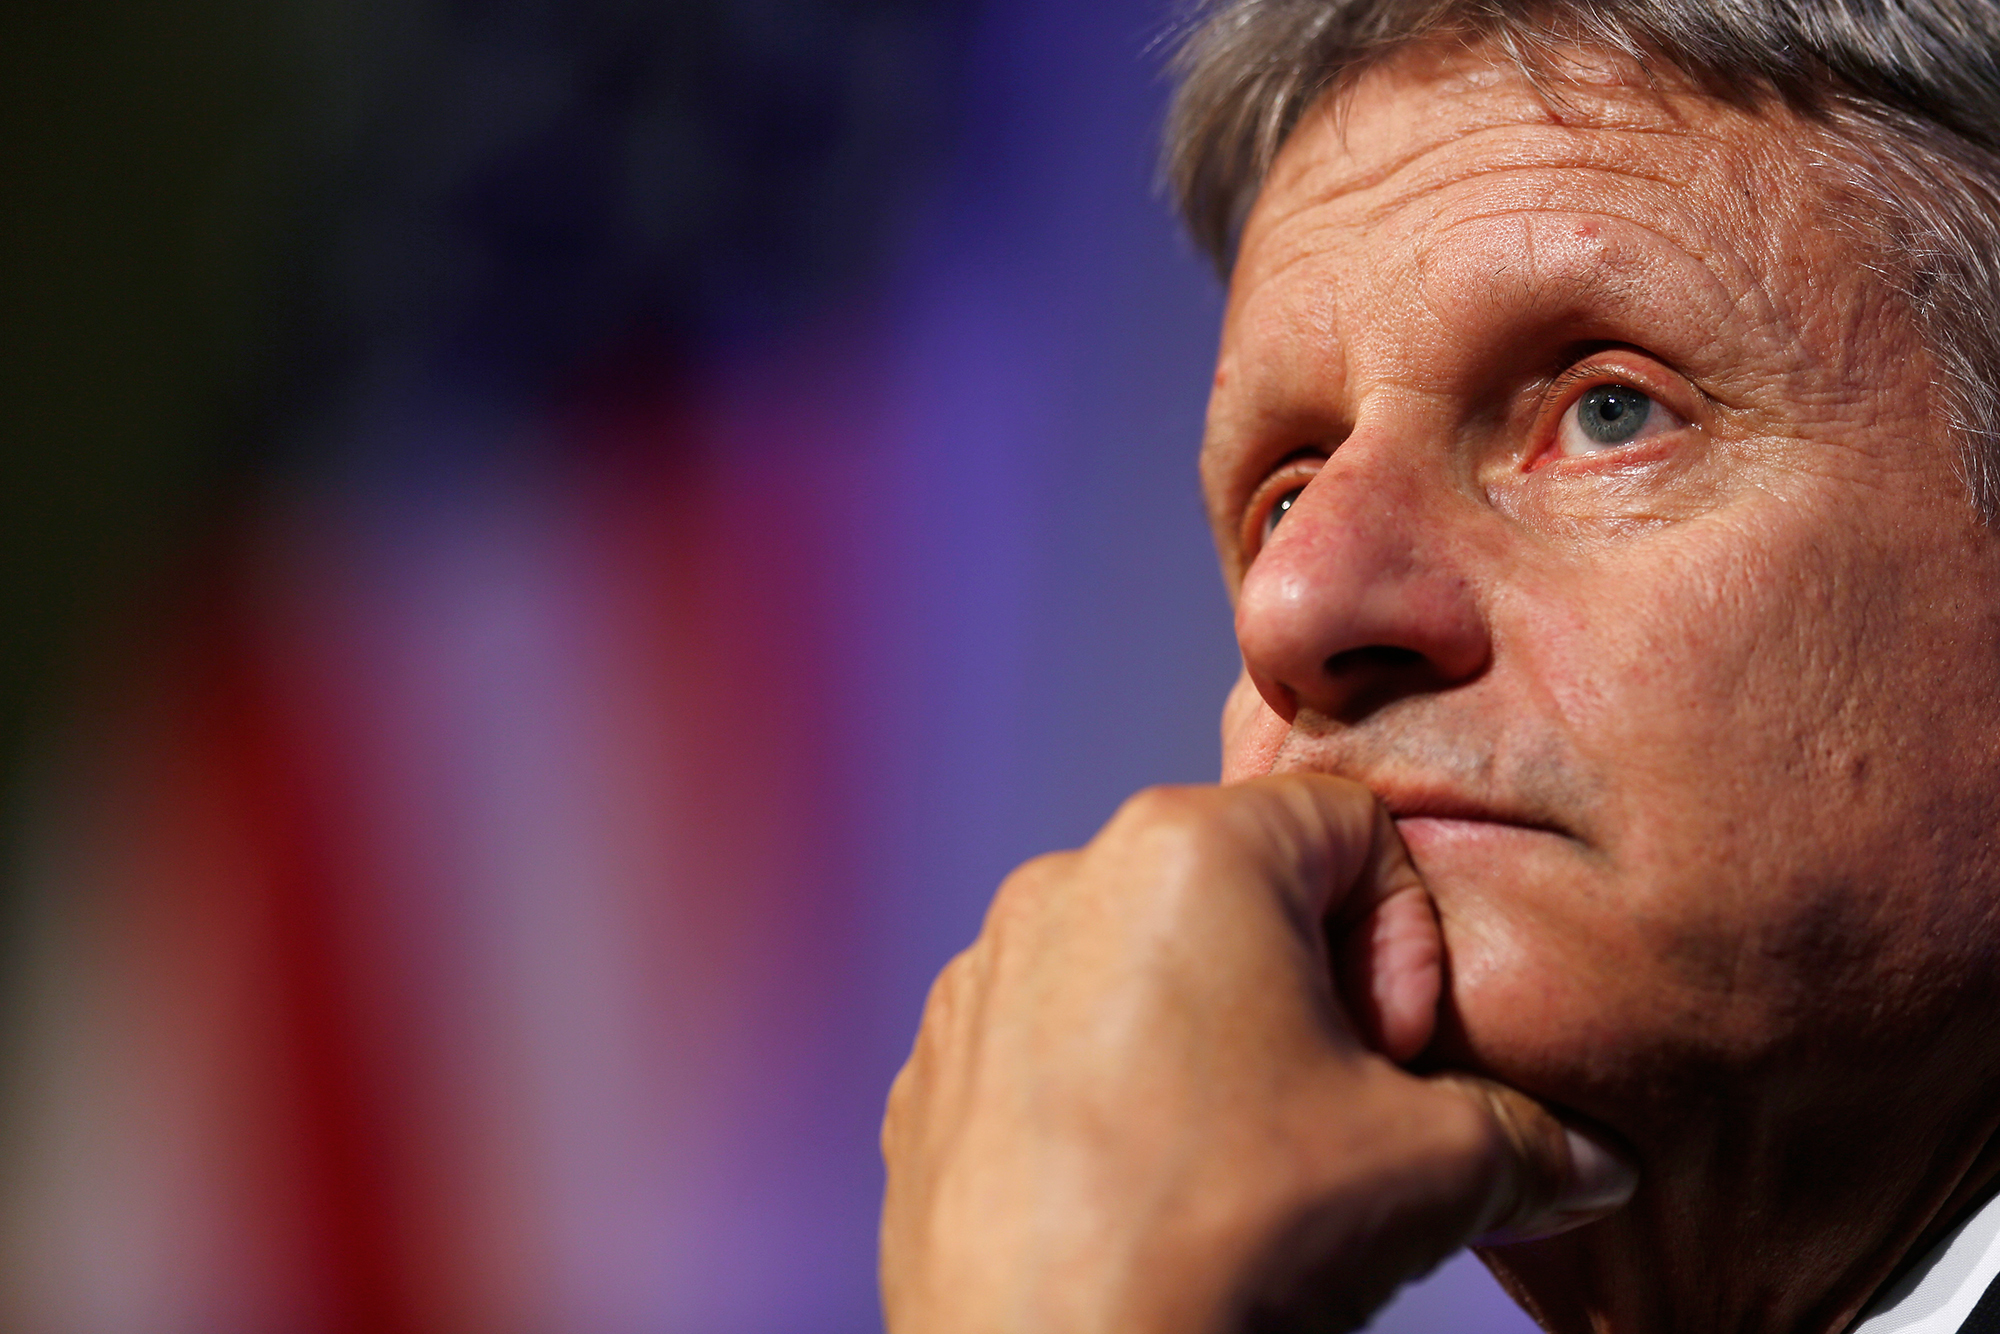 Gary Johnson, 2016 Libertarian presidential nominee, listens to questions from audience members during a campaign event at Purdue University in West Lafayette, Ind., on Sept. 13, 2016. (Luke Sharrett—Getty Images)